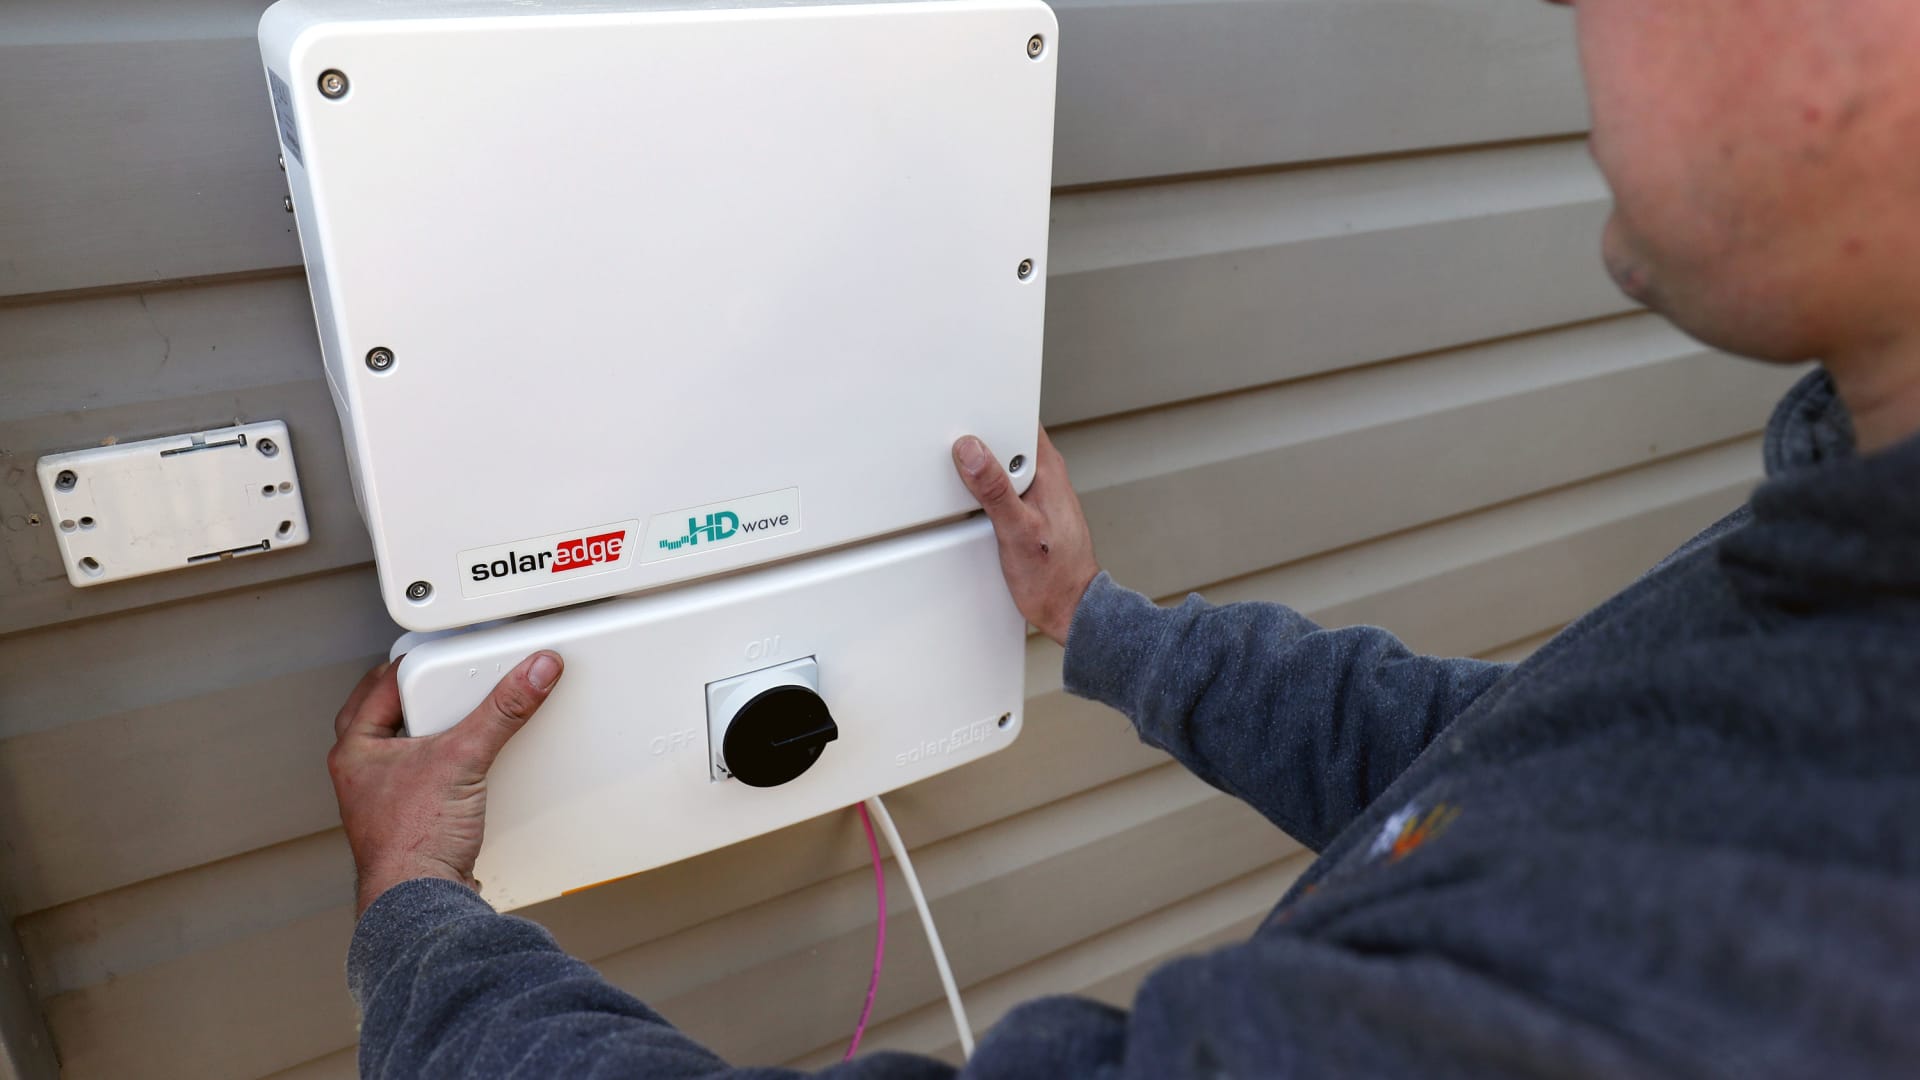 A Solarpro employee installs a SolarEdge Technologies inverter at a residential property in Sydney, Australia, on May 17, 2021.